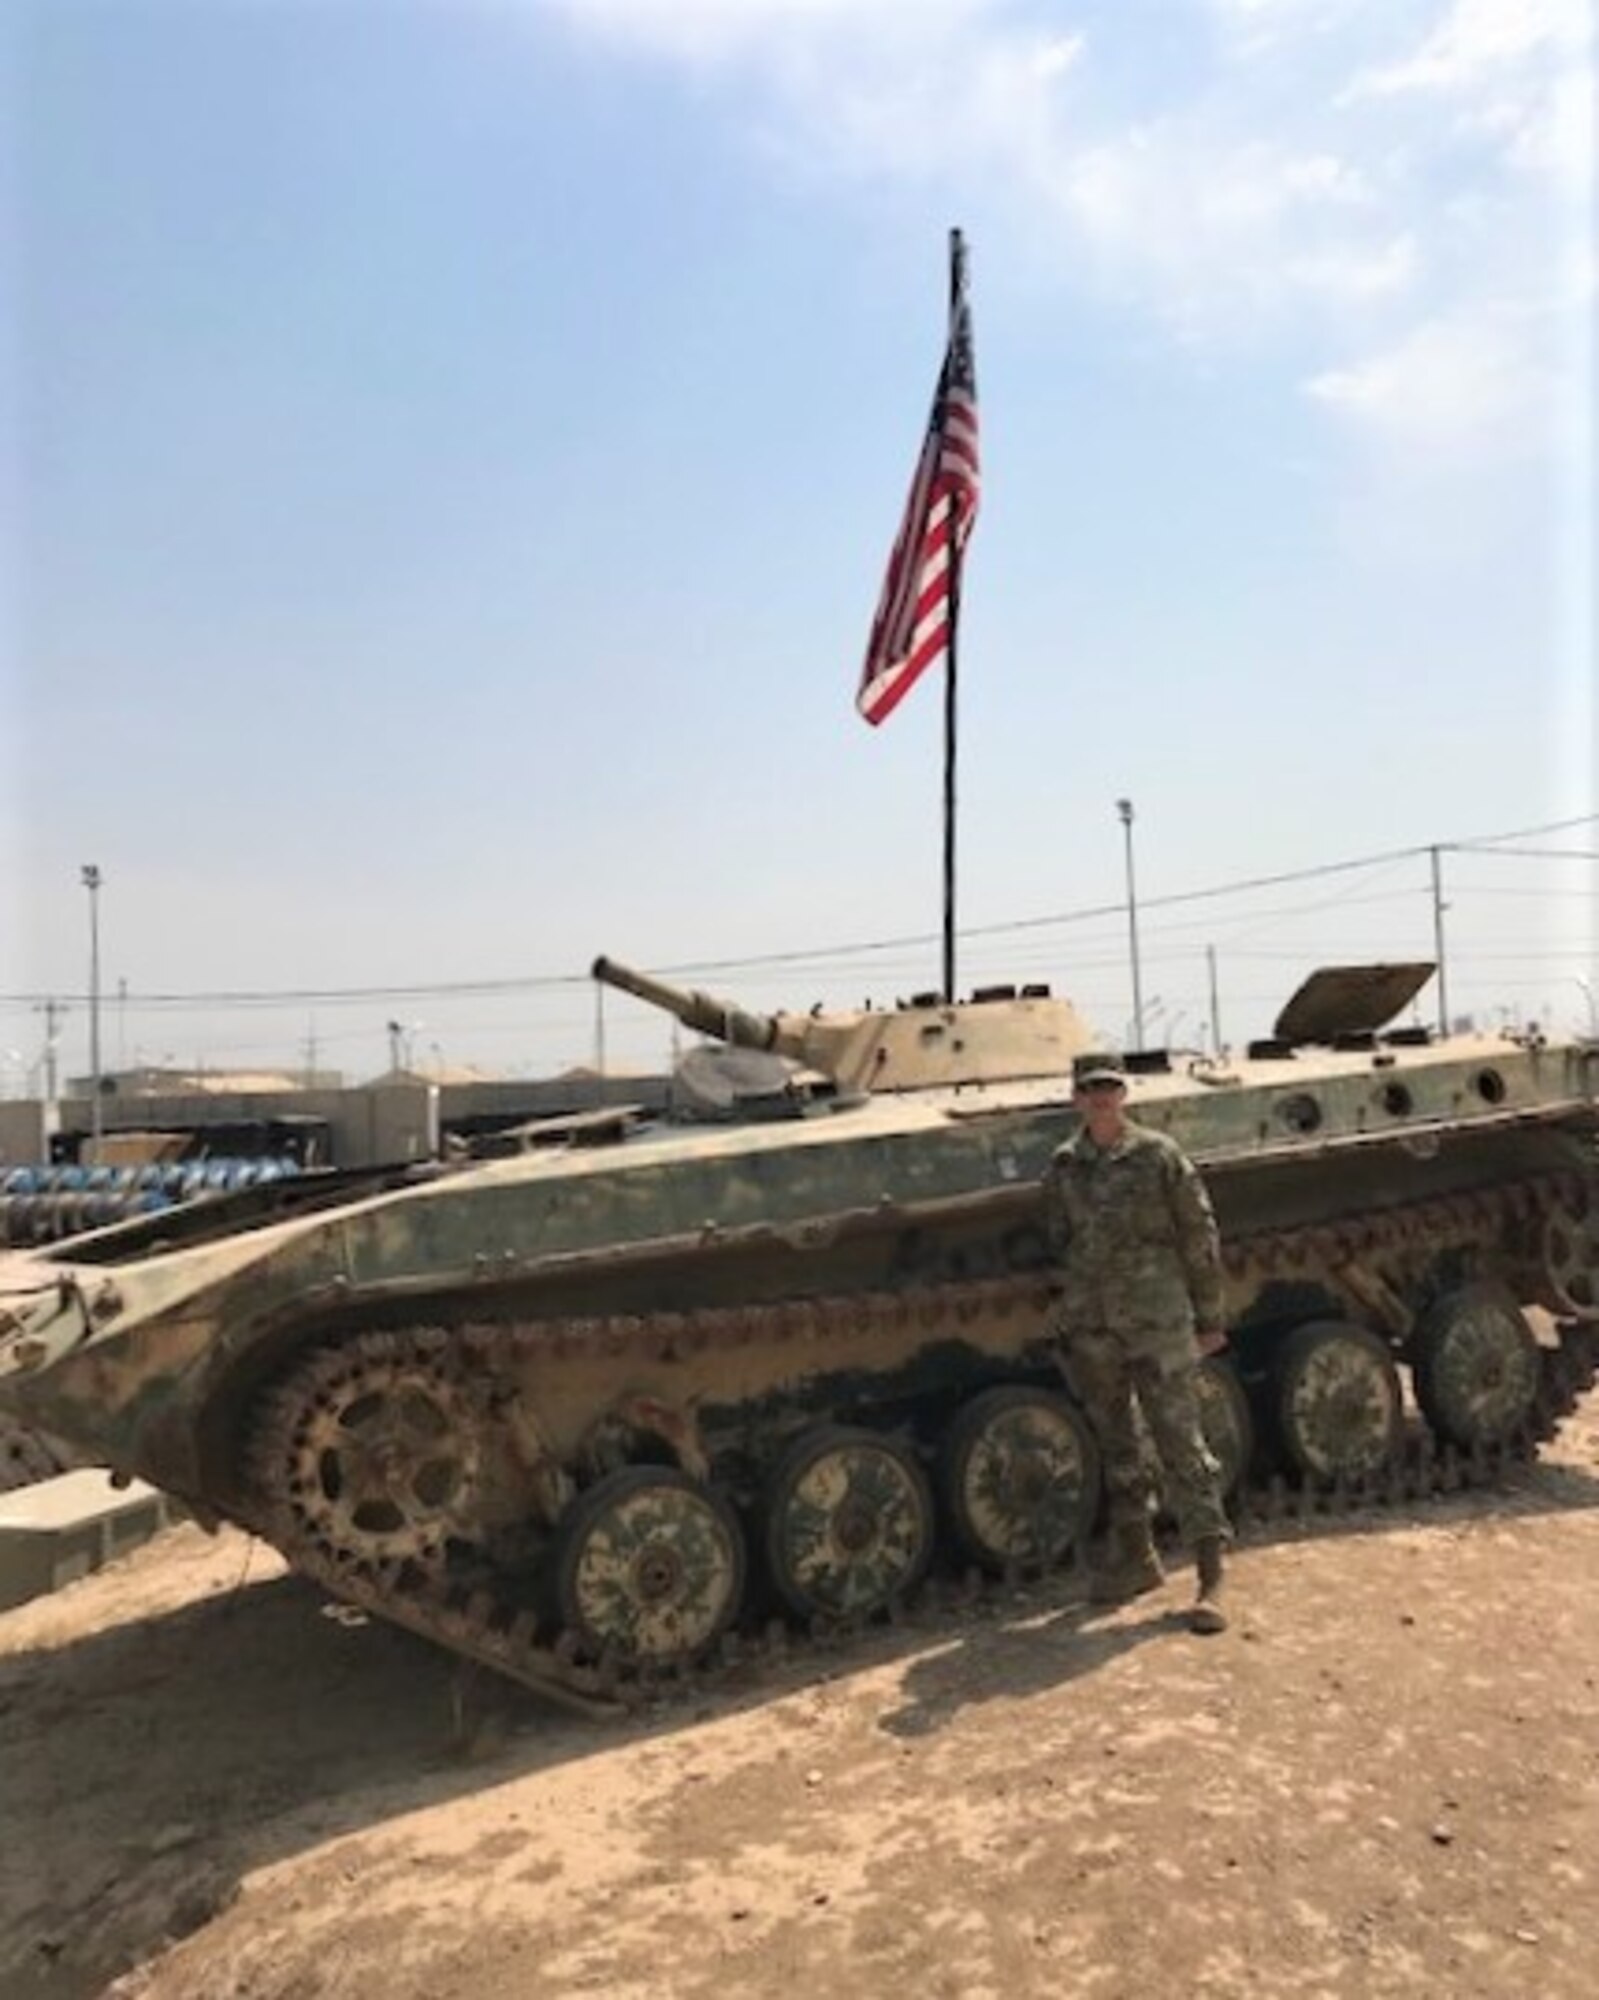 Senior Master Sgt. Joy Rohauer poses next to a tank at one of the bases she visited as the Air Force Central Command’s occupational safety superintendent, August 2019. During her site visits to bases in the area of operations, she evaluated the health and safety programs of the fighting force. (Courtesy photo)